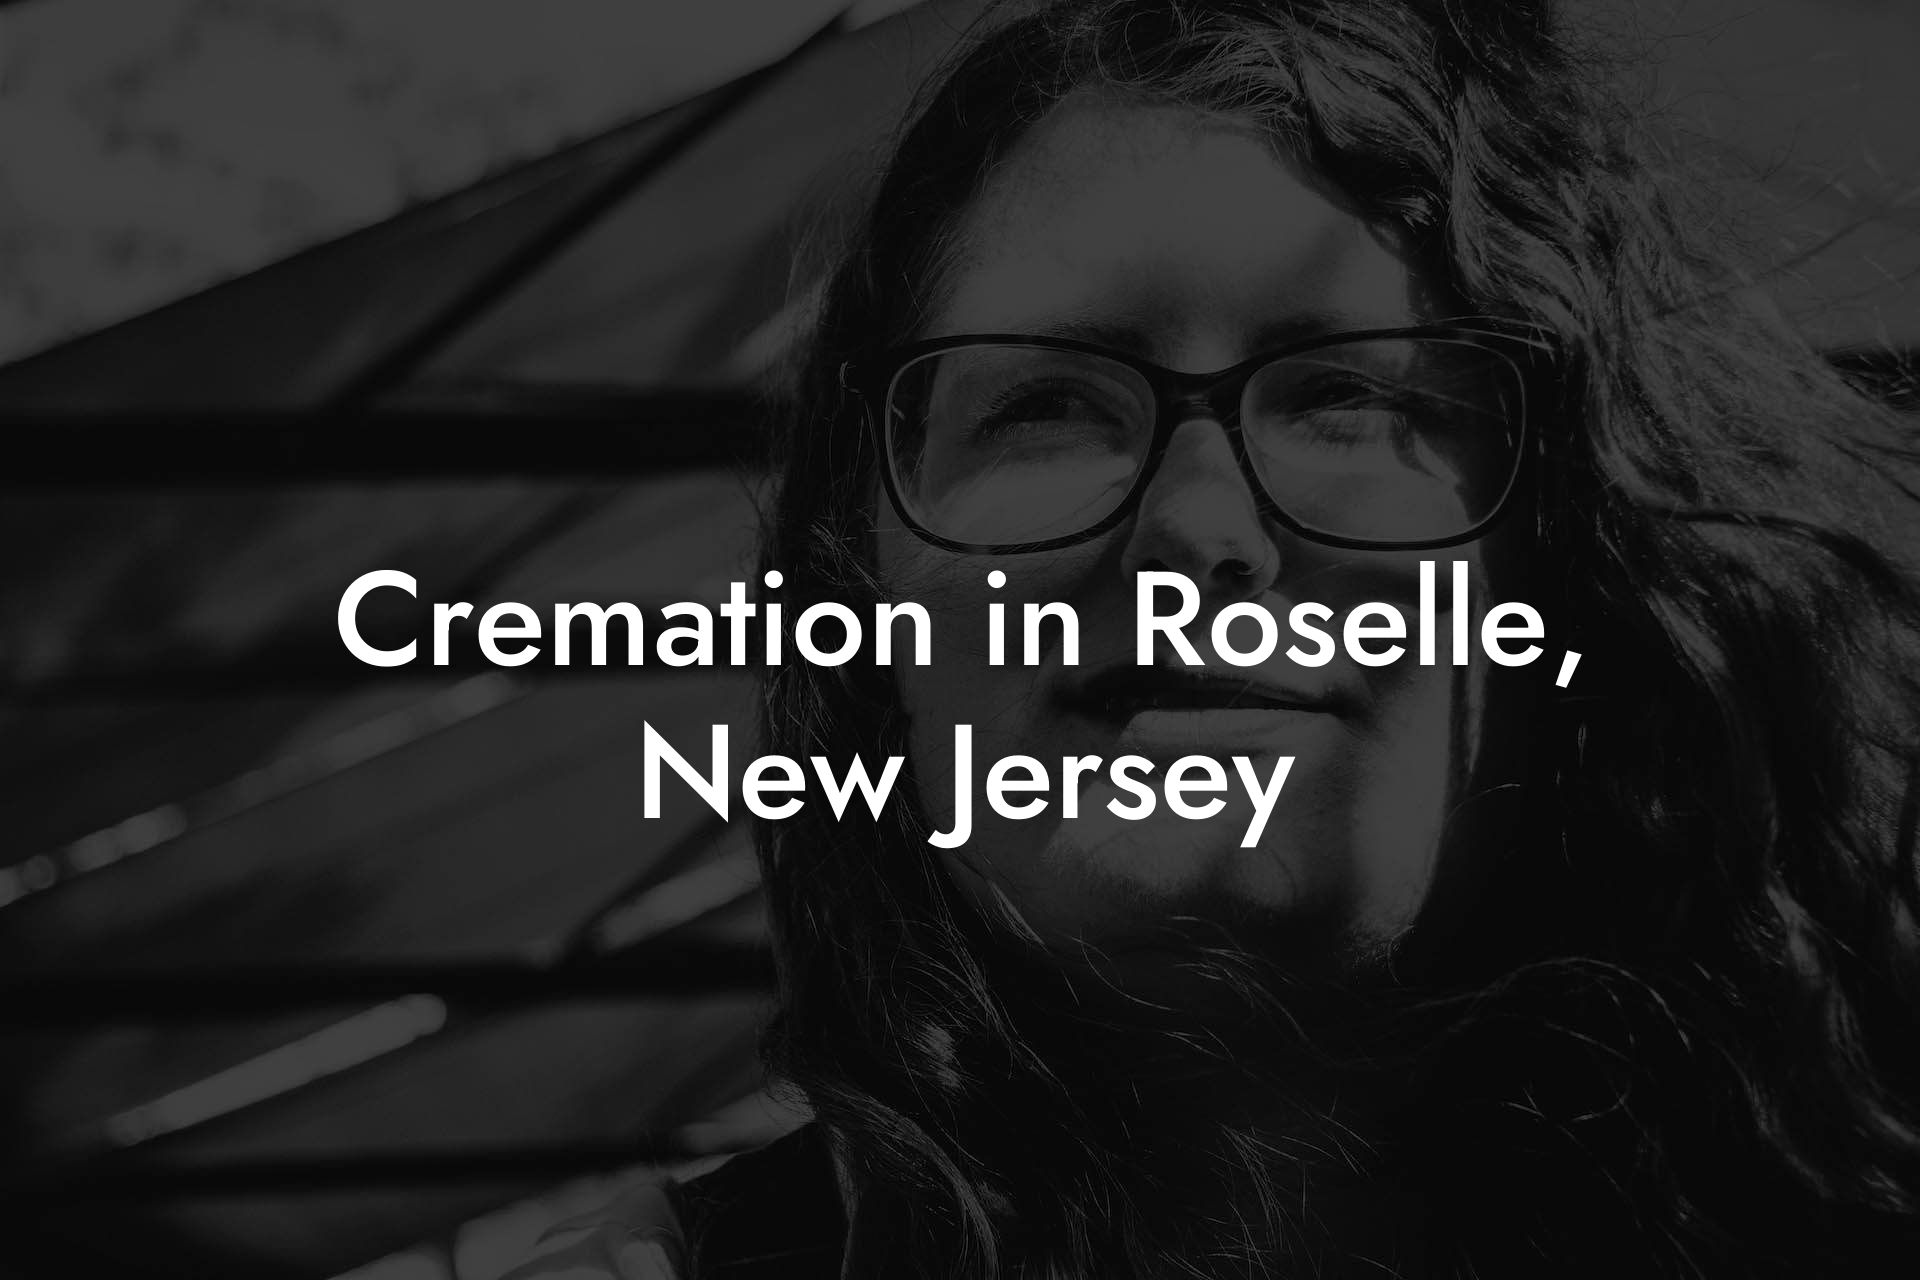 Cremation in Roselle, New Jersey